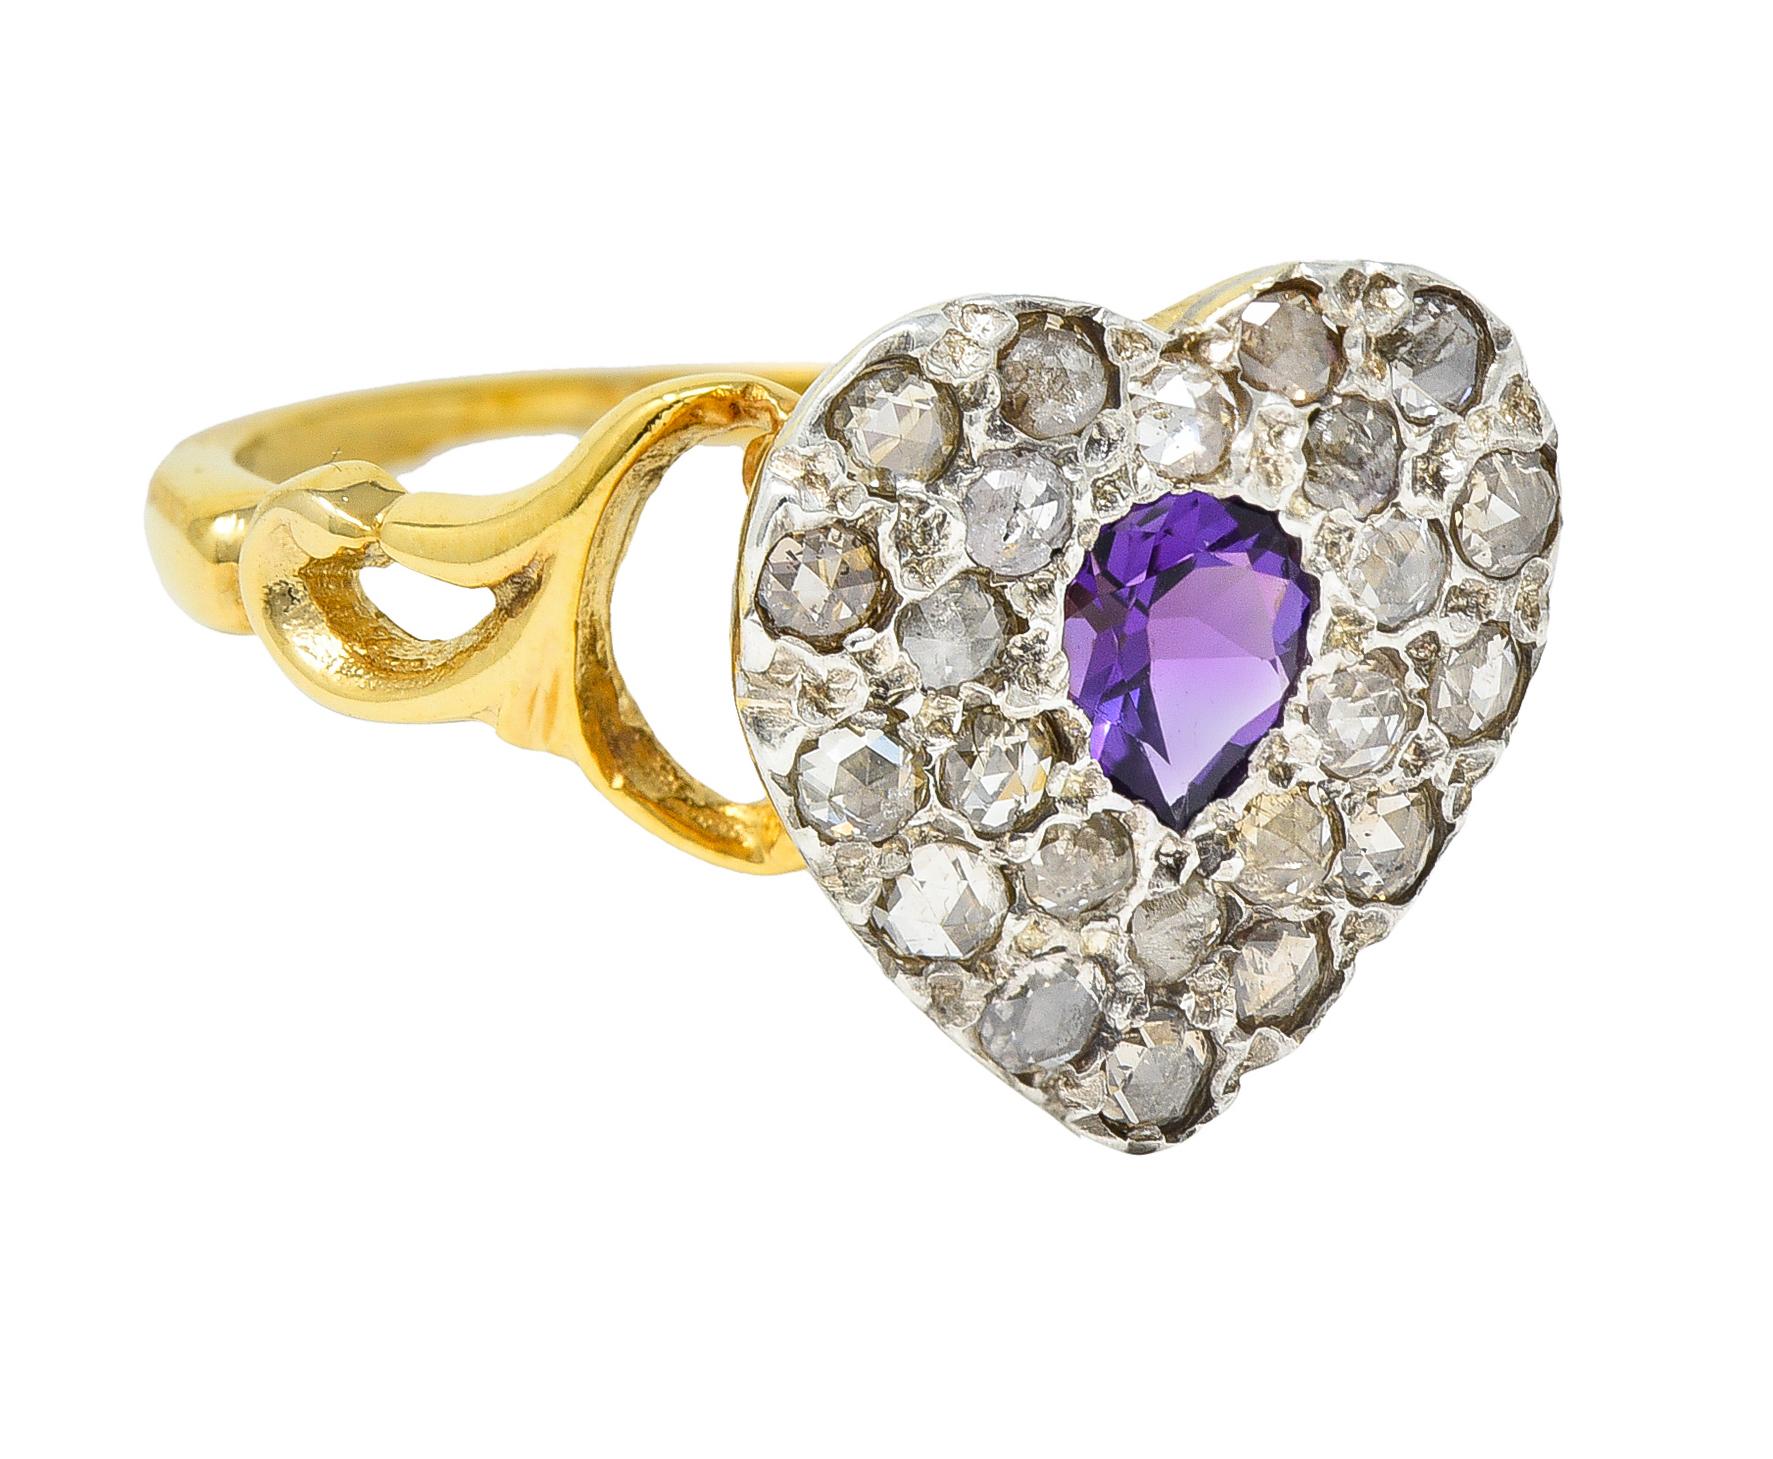 Centering a pear cut amethyst weighing approximately 0.23 carat - transparent medium purple
Bead set in a silver-topped heart form with a clustered surround of rose cut diamonds
Bead set and weighing approximately 0.51 carat total - quality